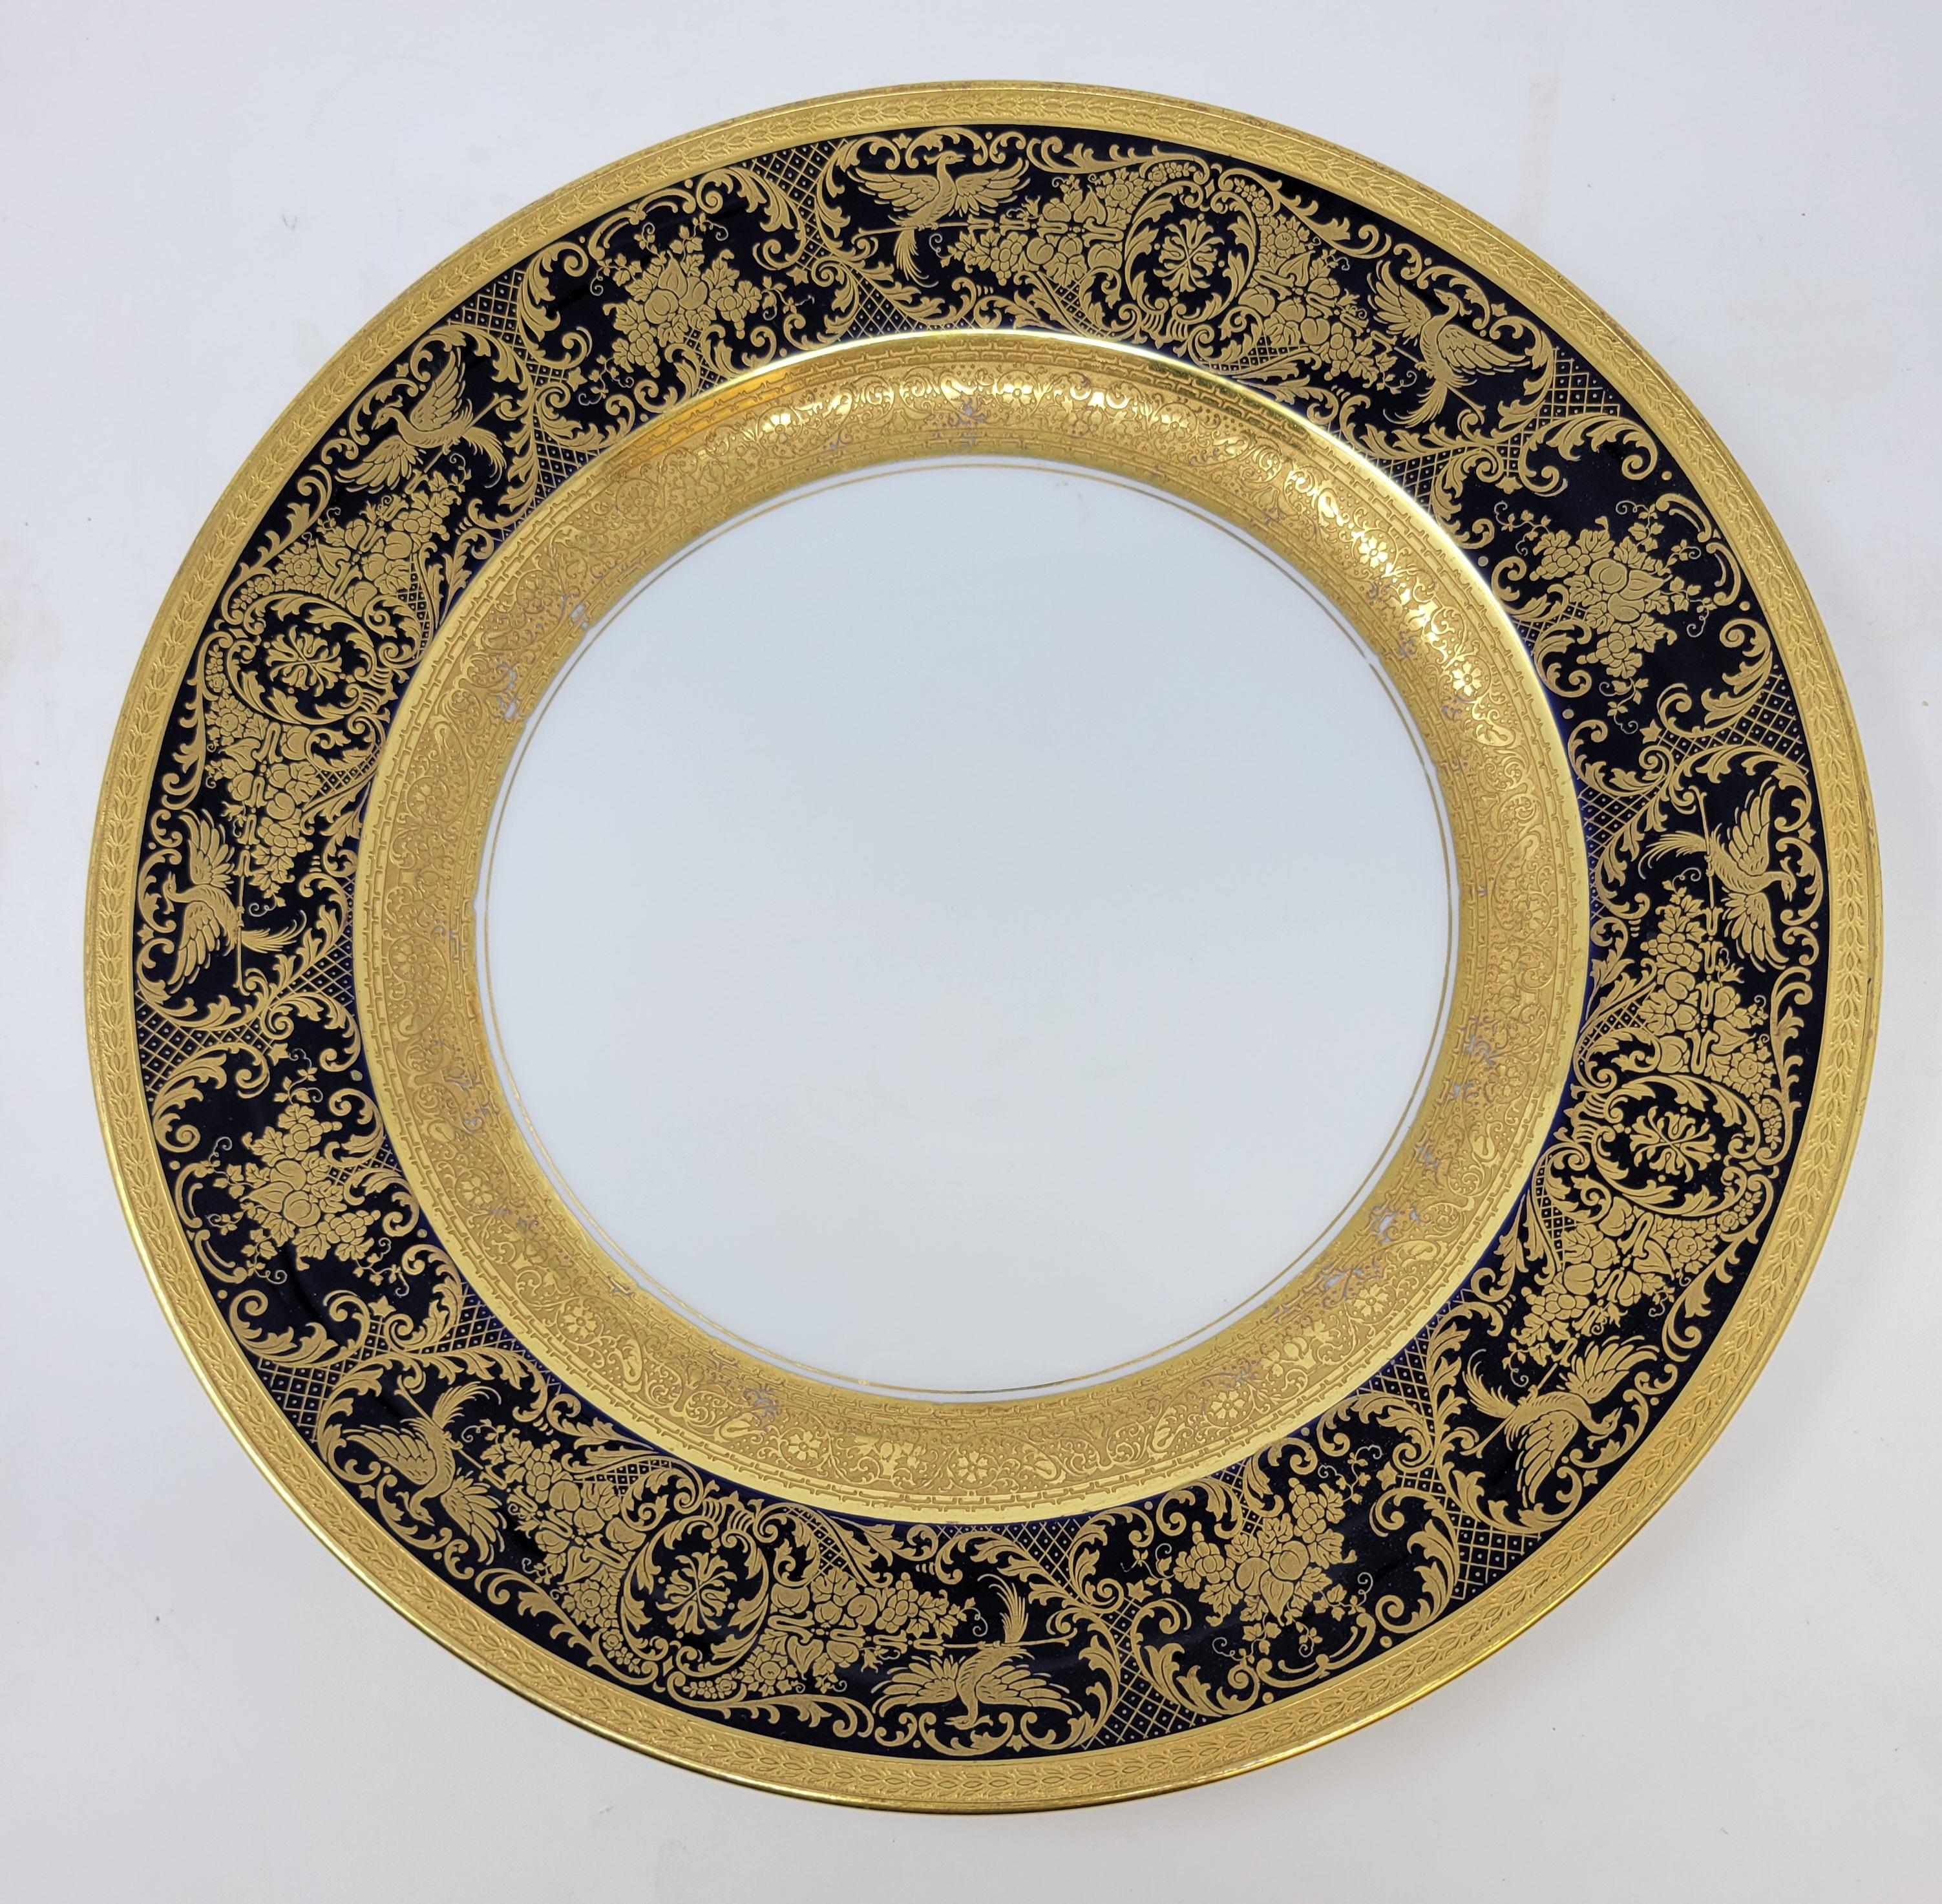 These dining plates with their rich blue color and fine gold detail will add to any table setting for a happy occasion.